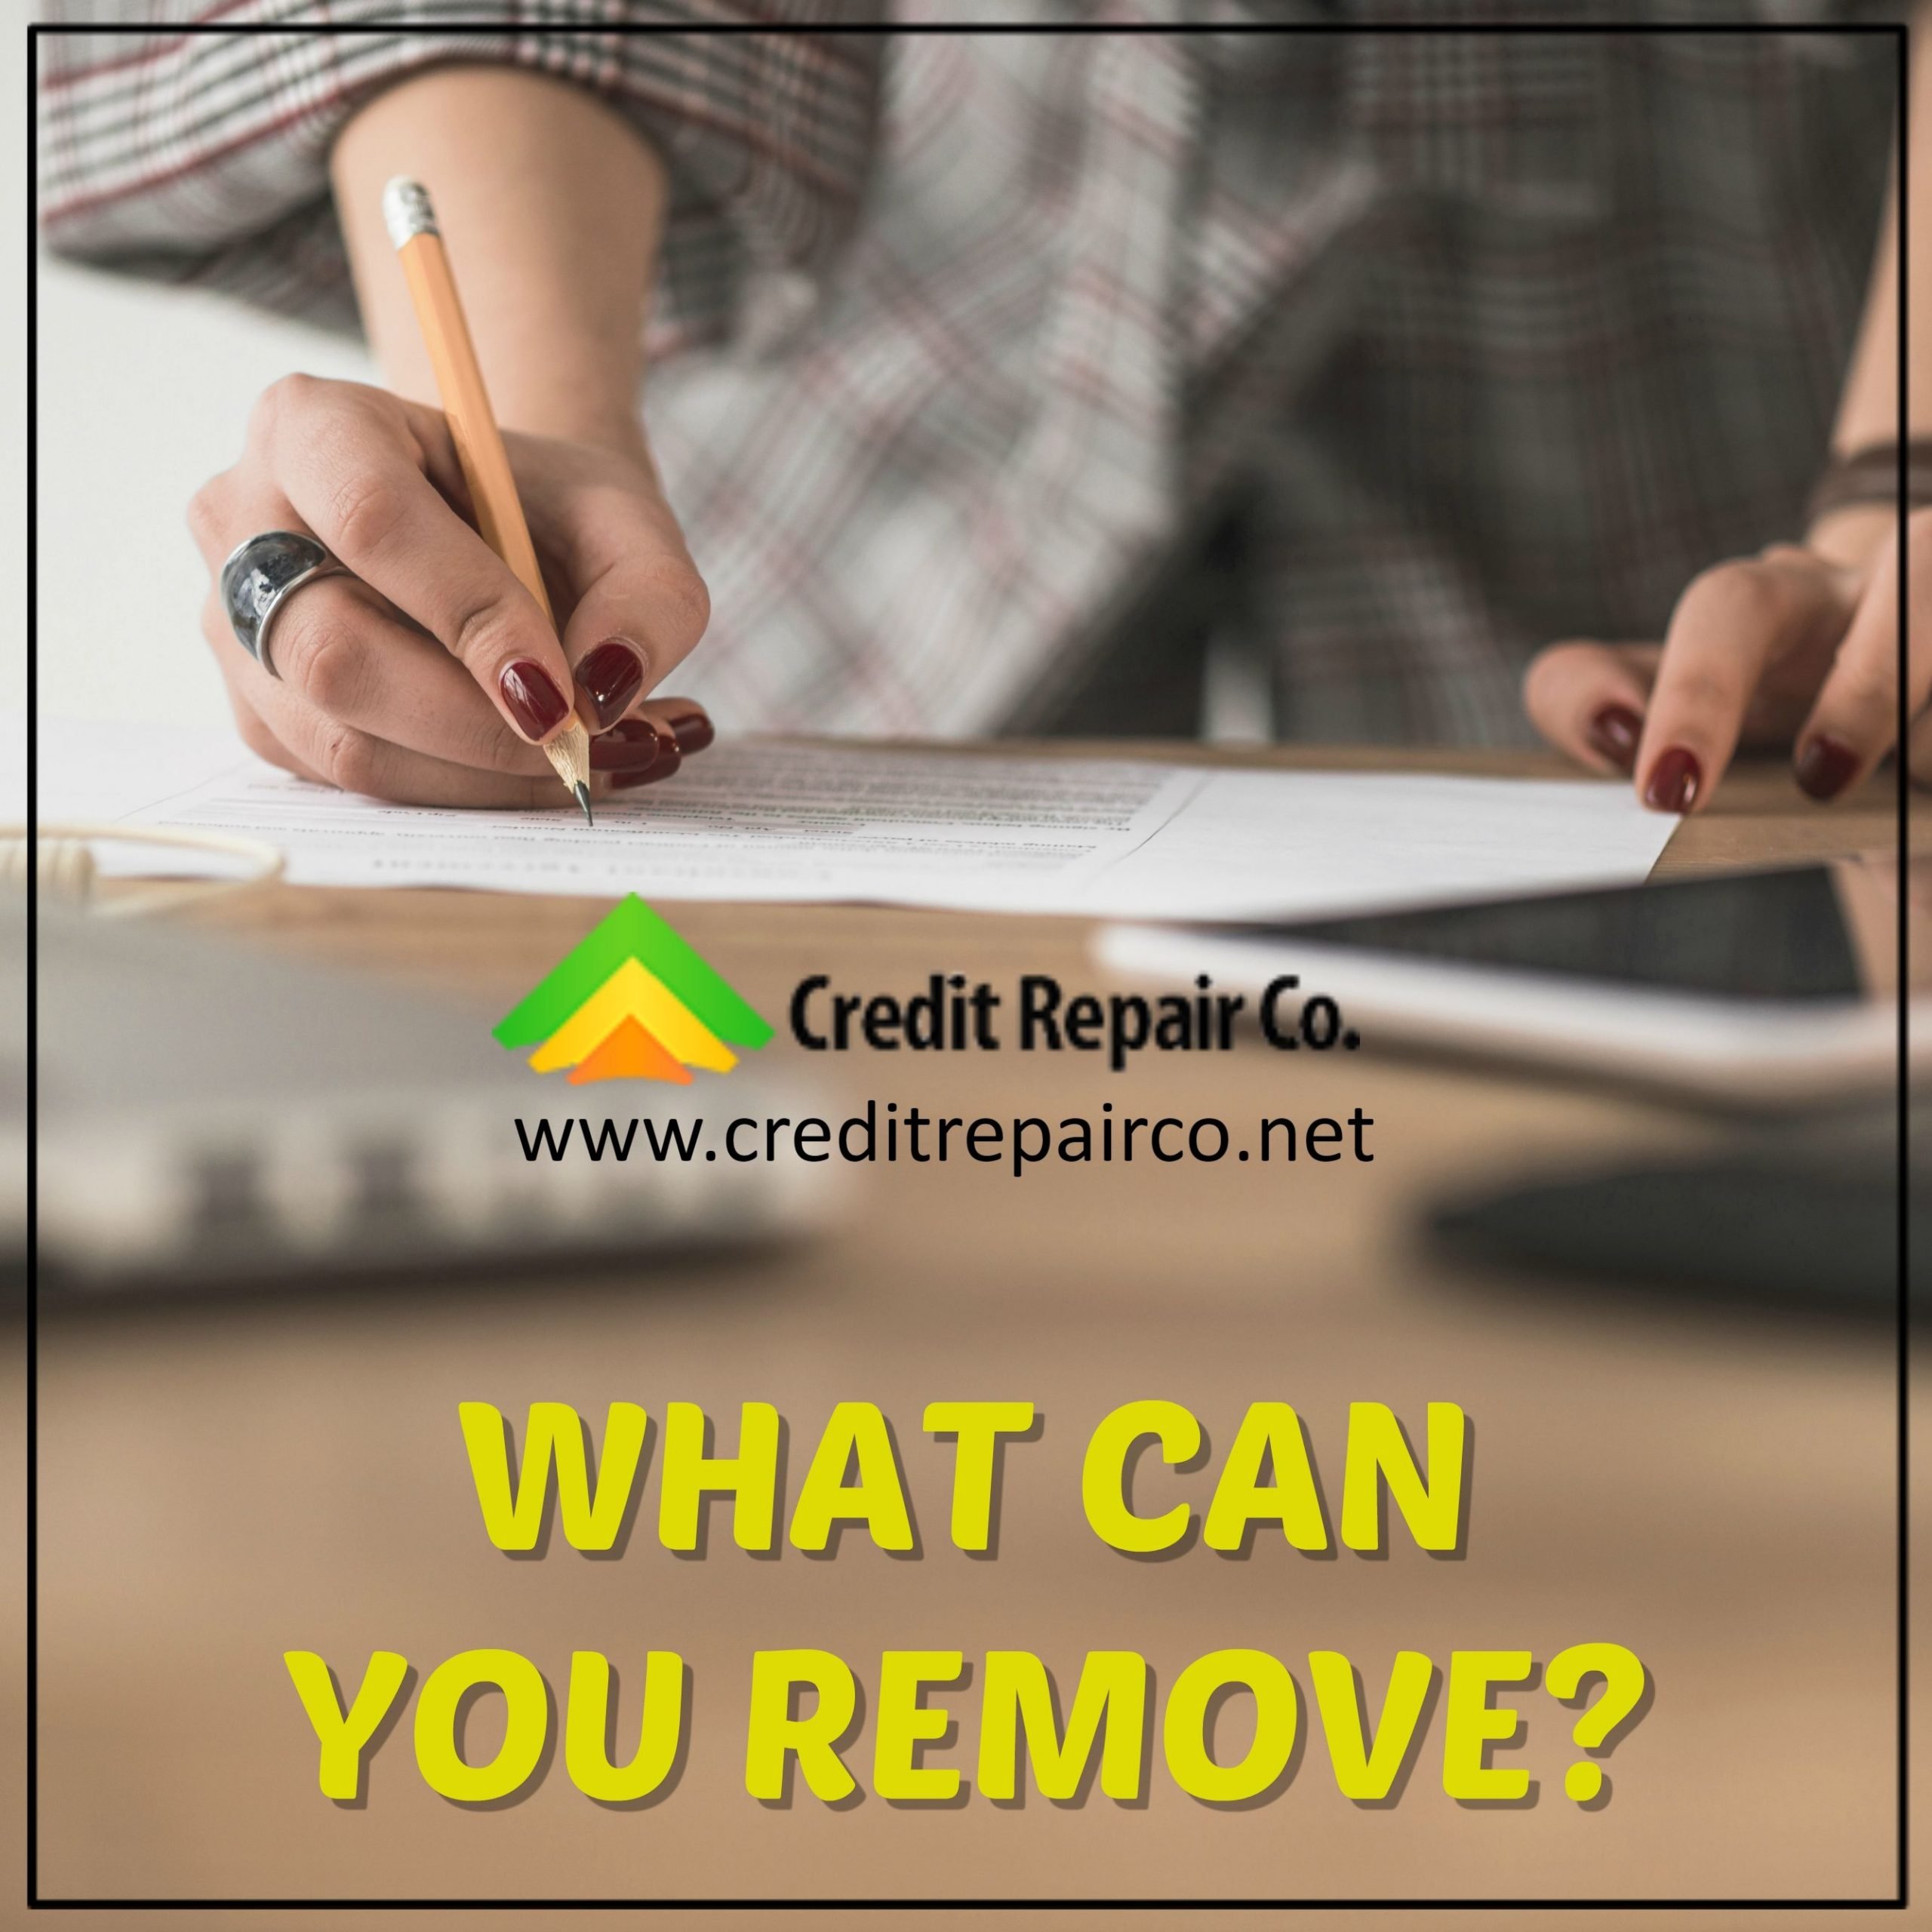 Our company can help you with your credit by removing negative items ...